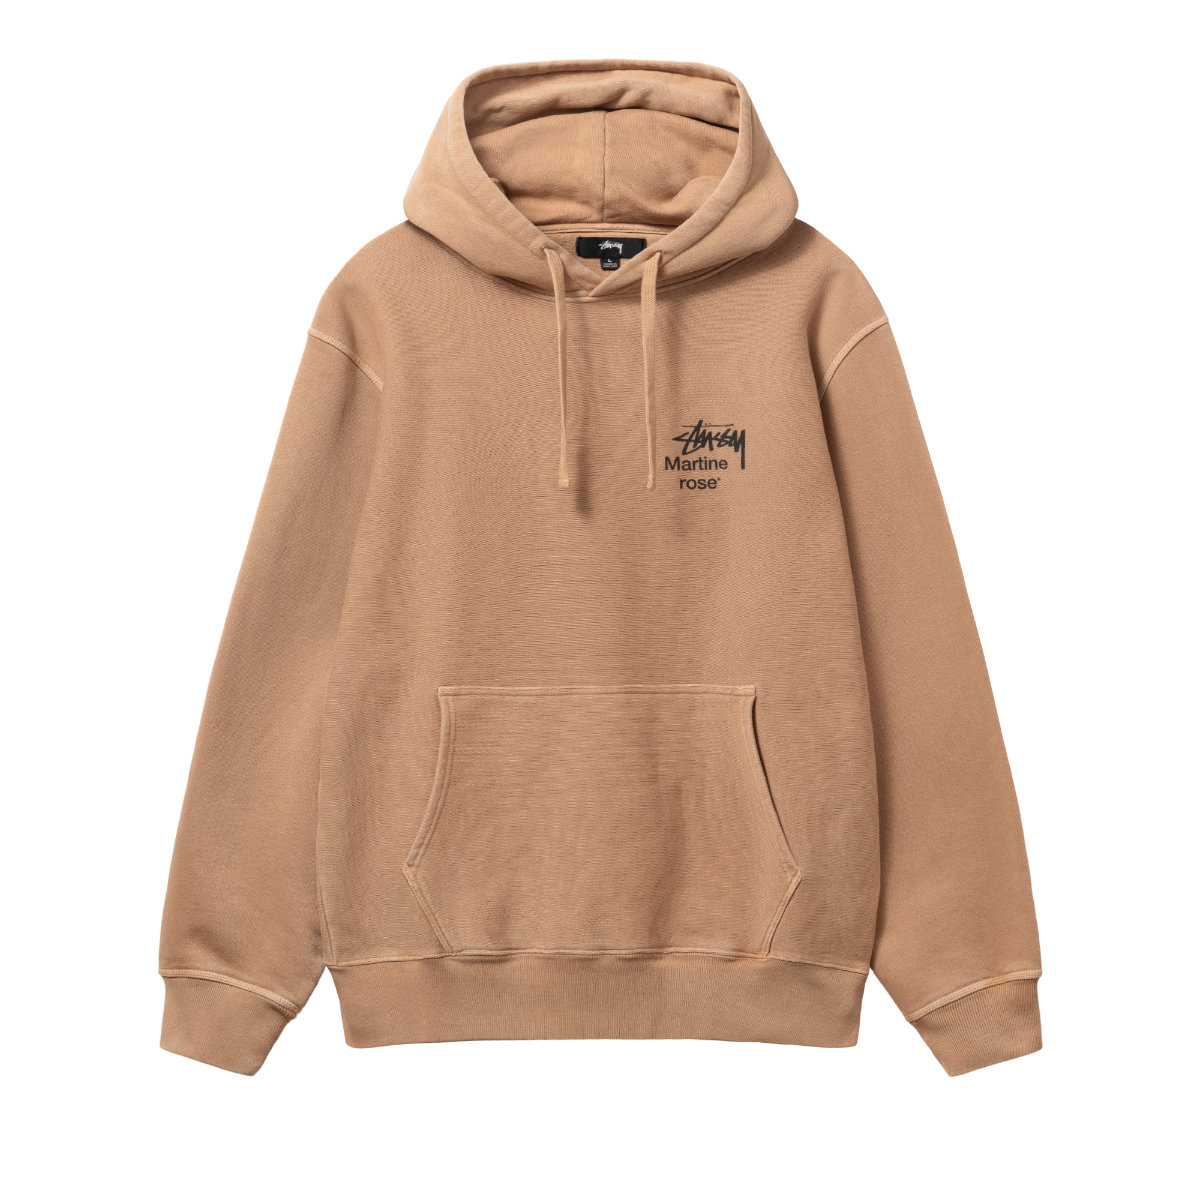 Gear Up for the Martine Rose and Stüssy Collaboration